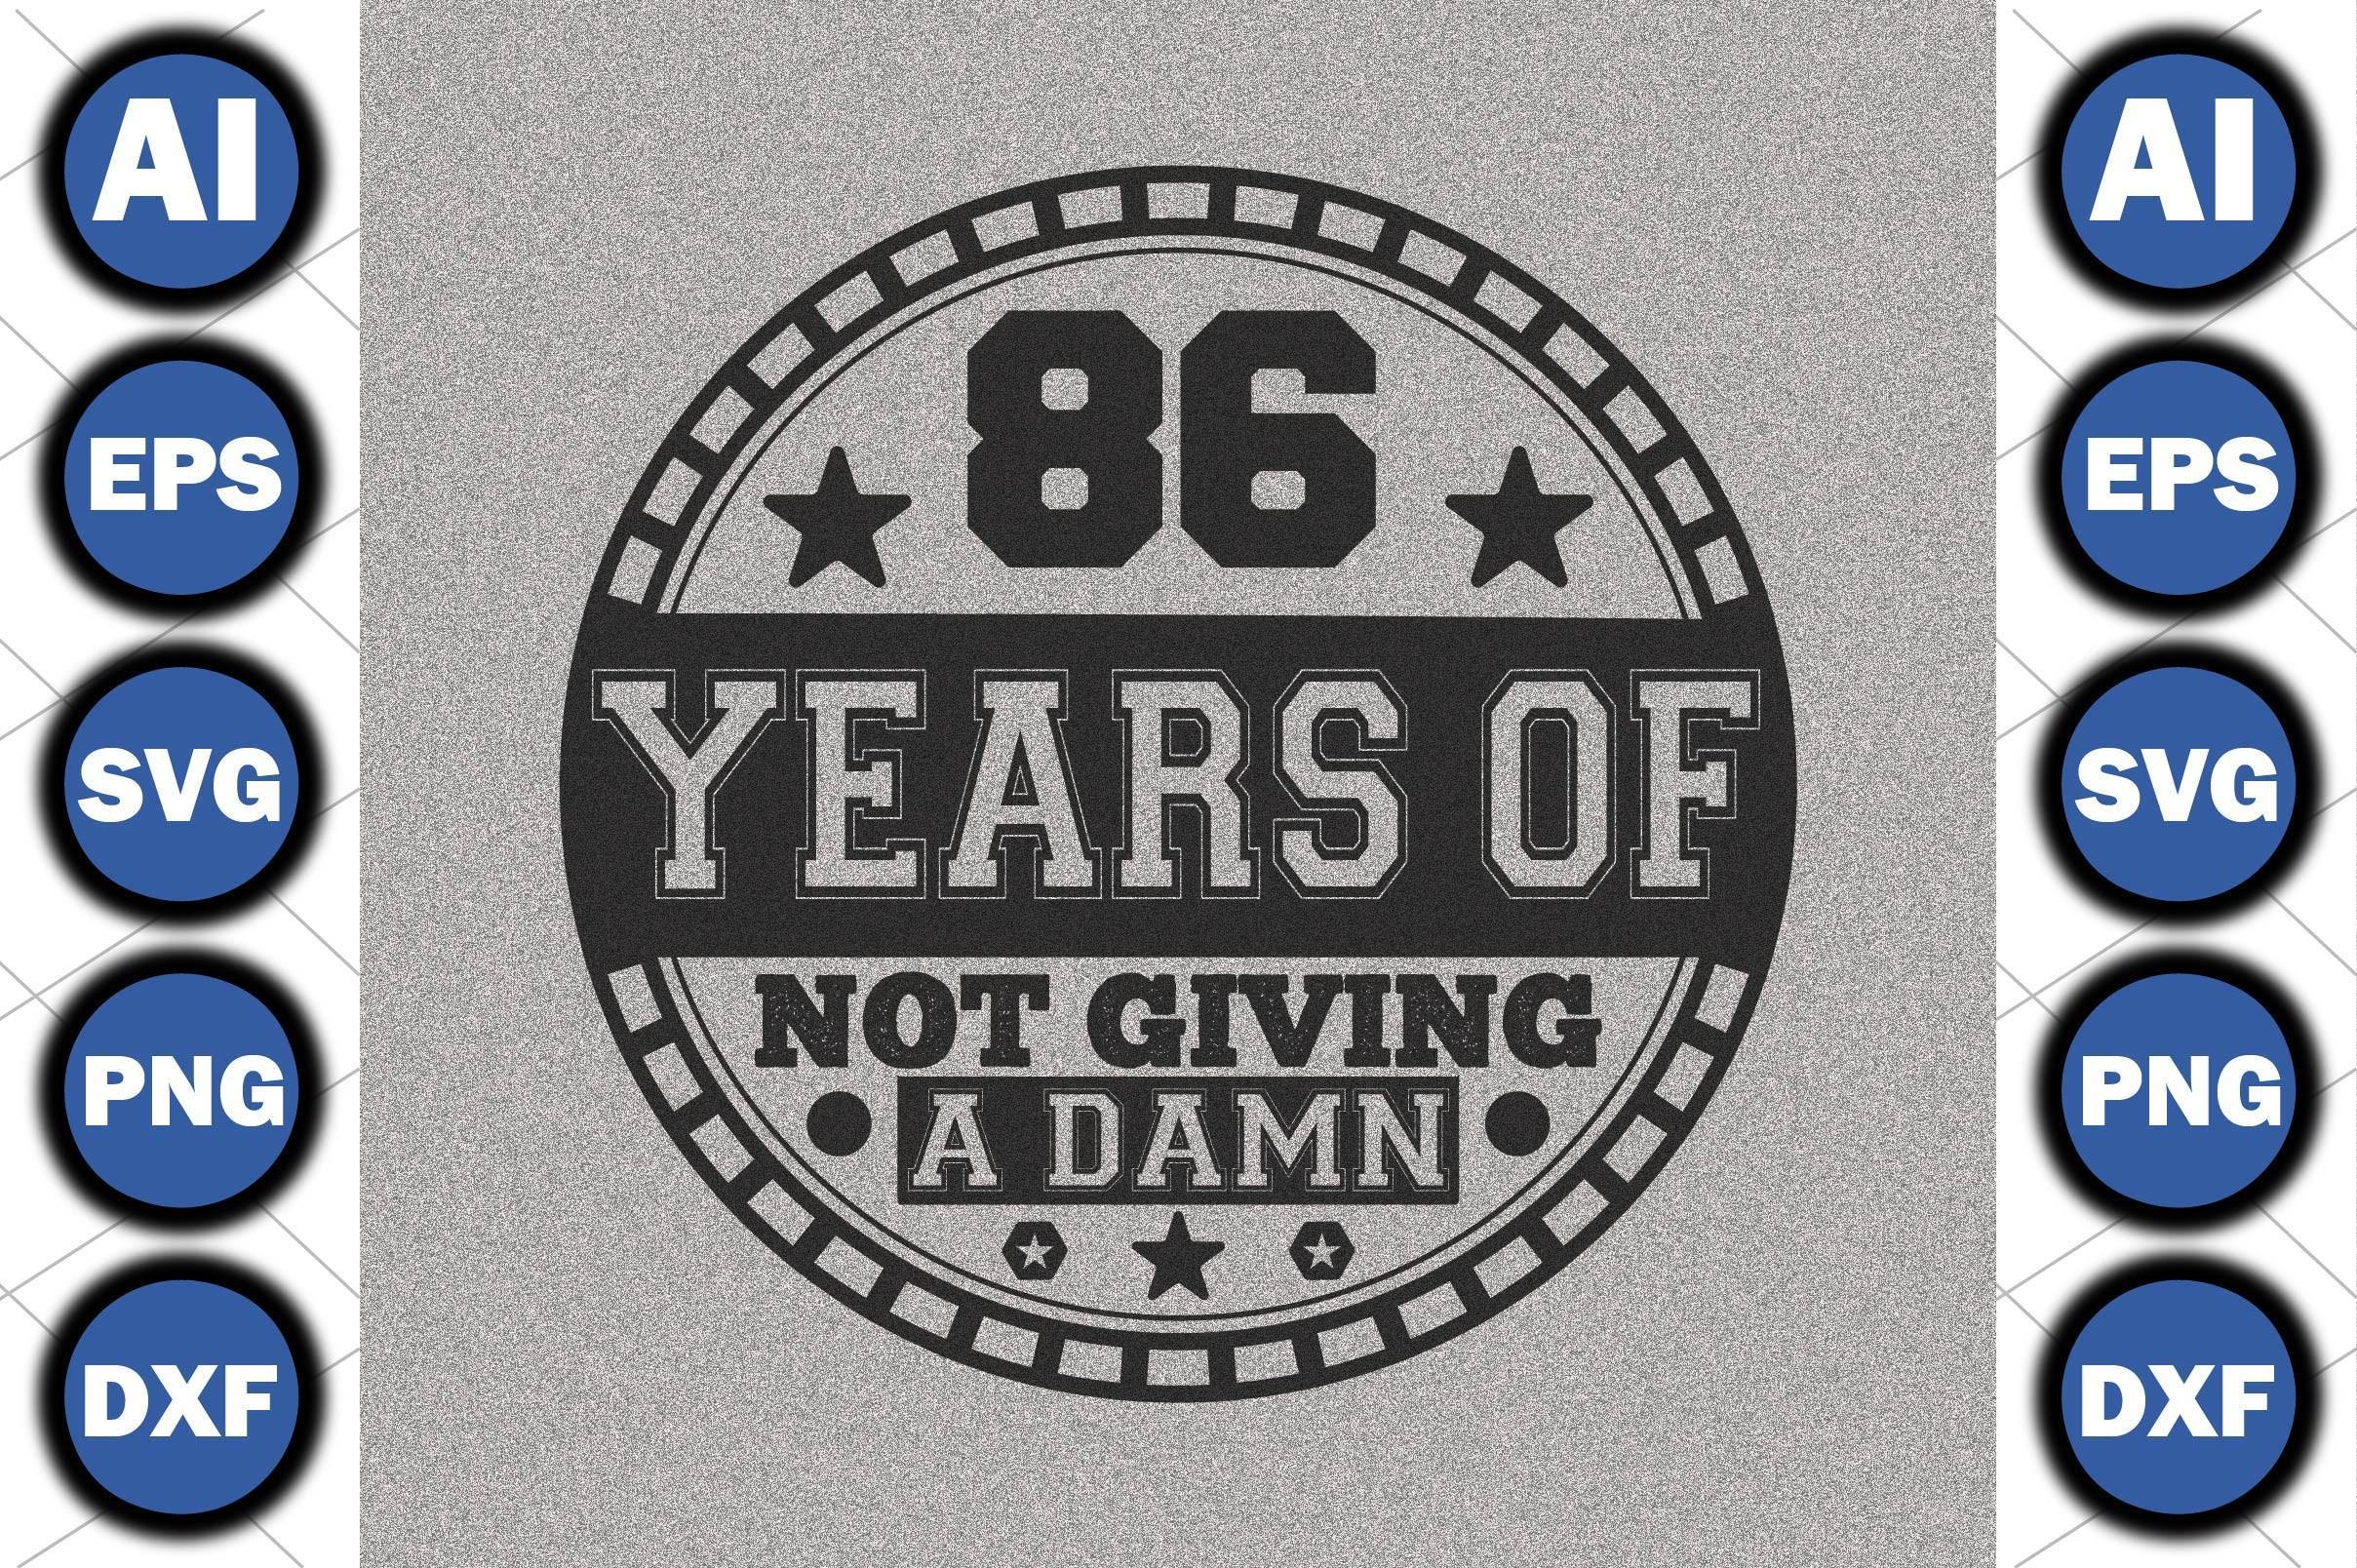 86 Years of Not Giving a Damn